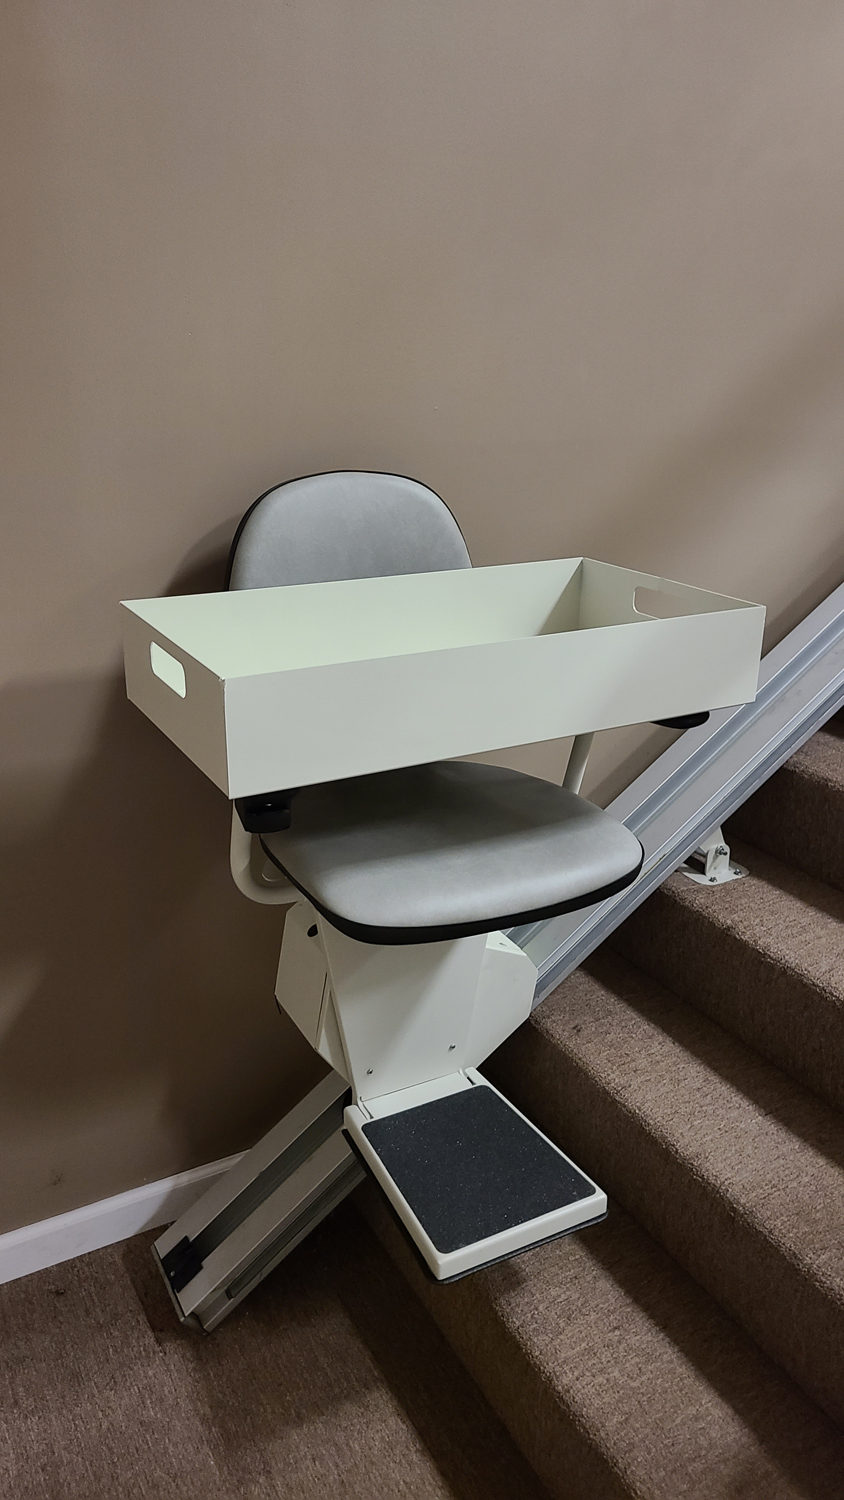 Acuro Lift-Up Stair Storage - Acuro Home Improvements